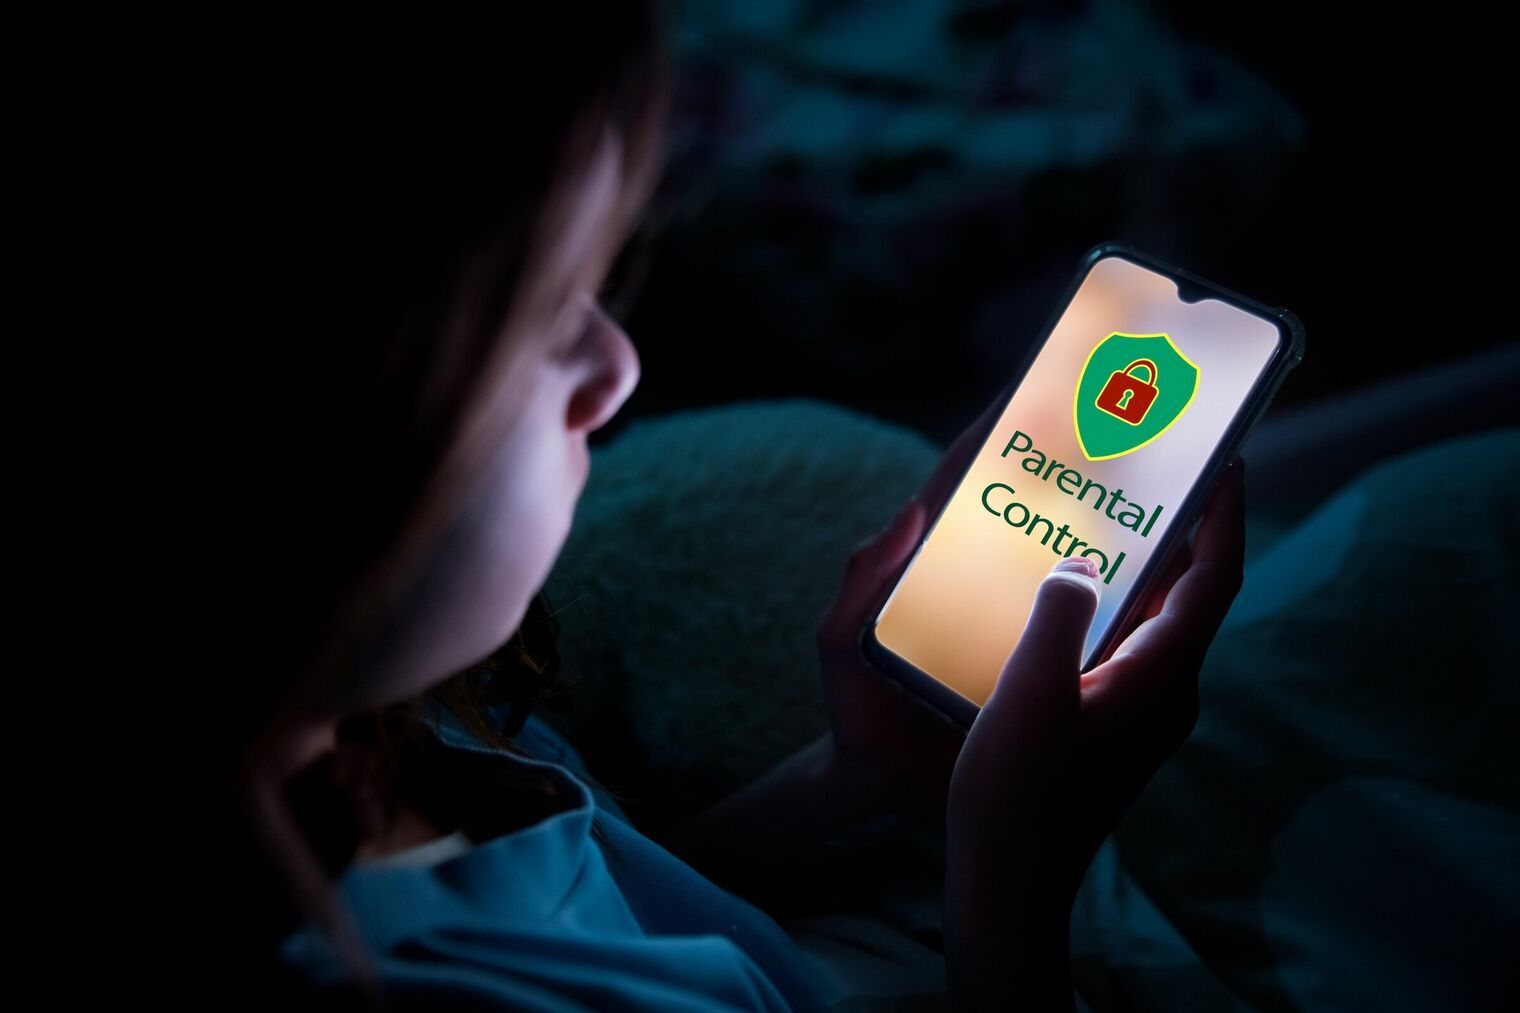 young child in a dark room looking at a lighted smartphone screen that says 